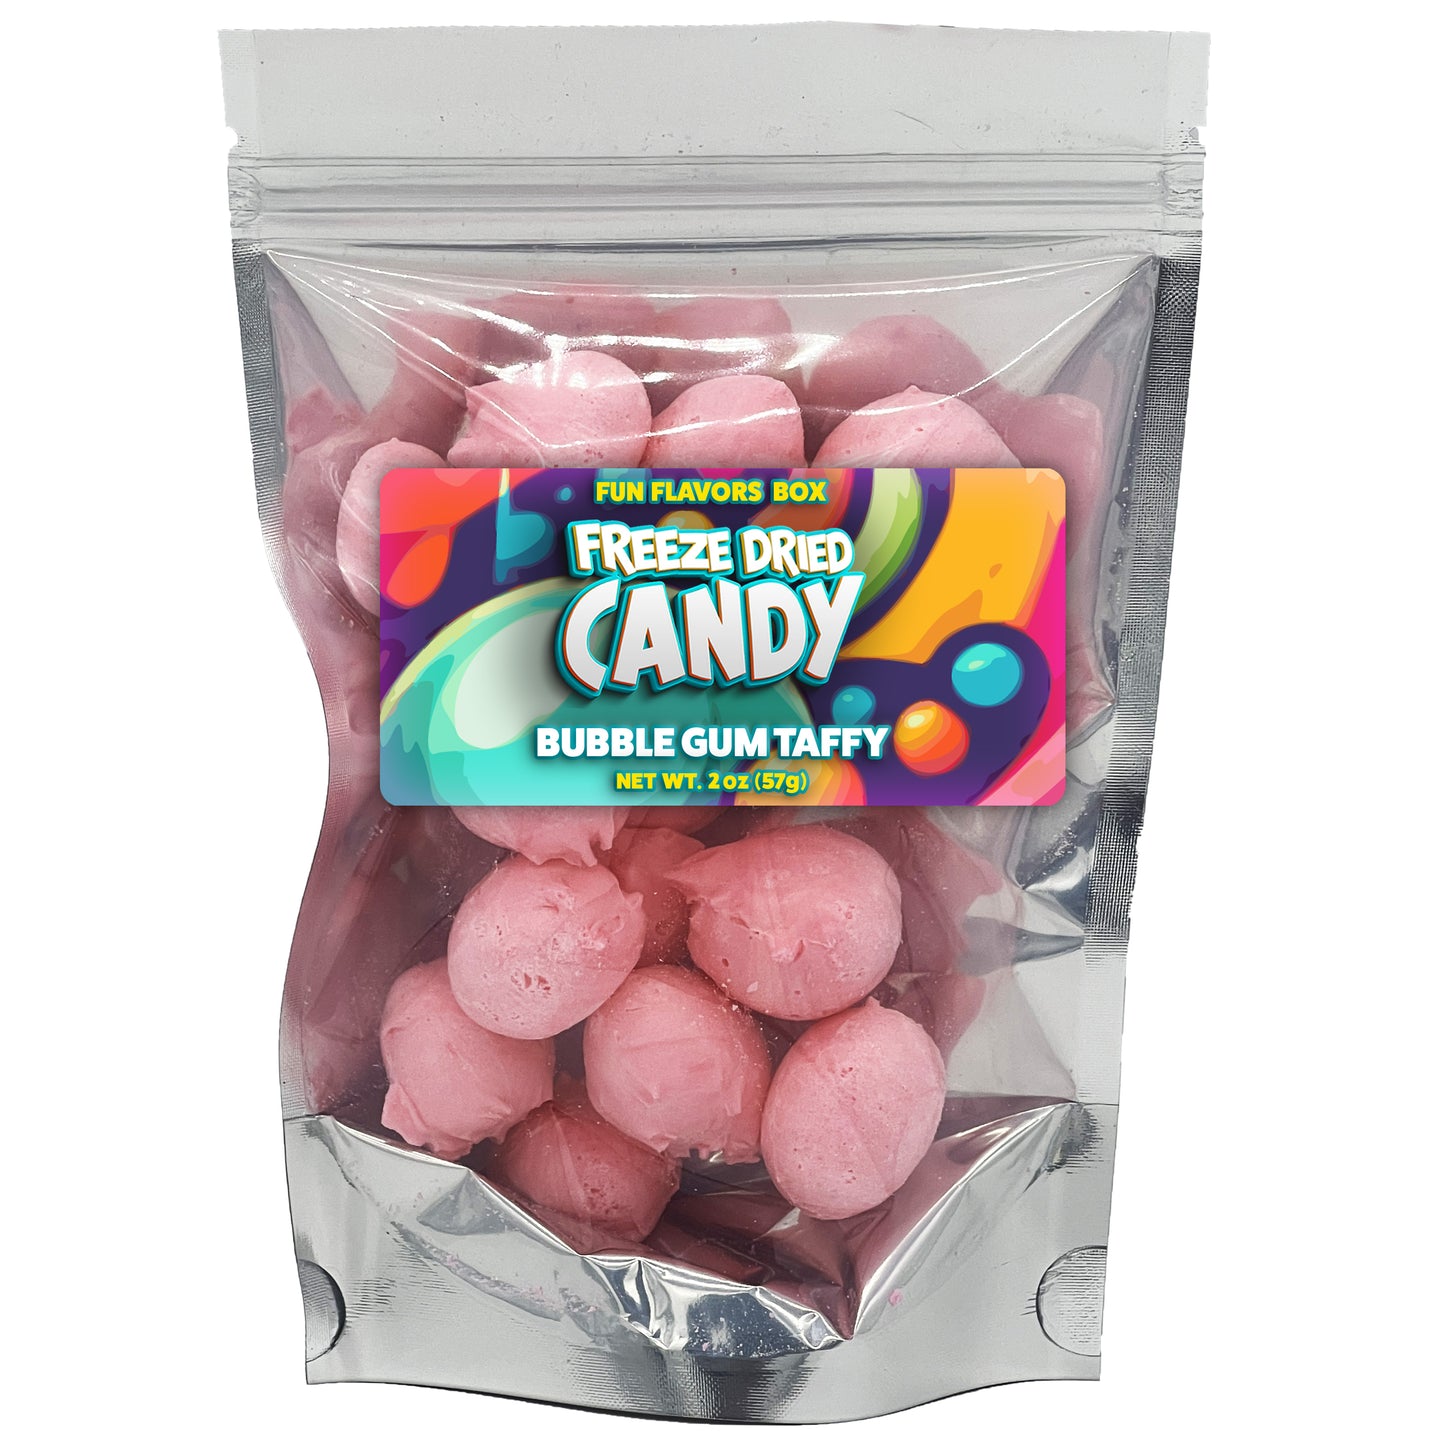 Freeze Dried Candy Bubble Gum Taffy Variety Pack – Crunch Candy Treats Space Theme Party Favor Gift Idea, 2 oz